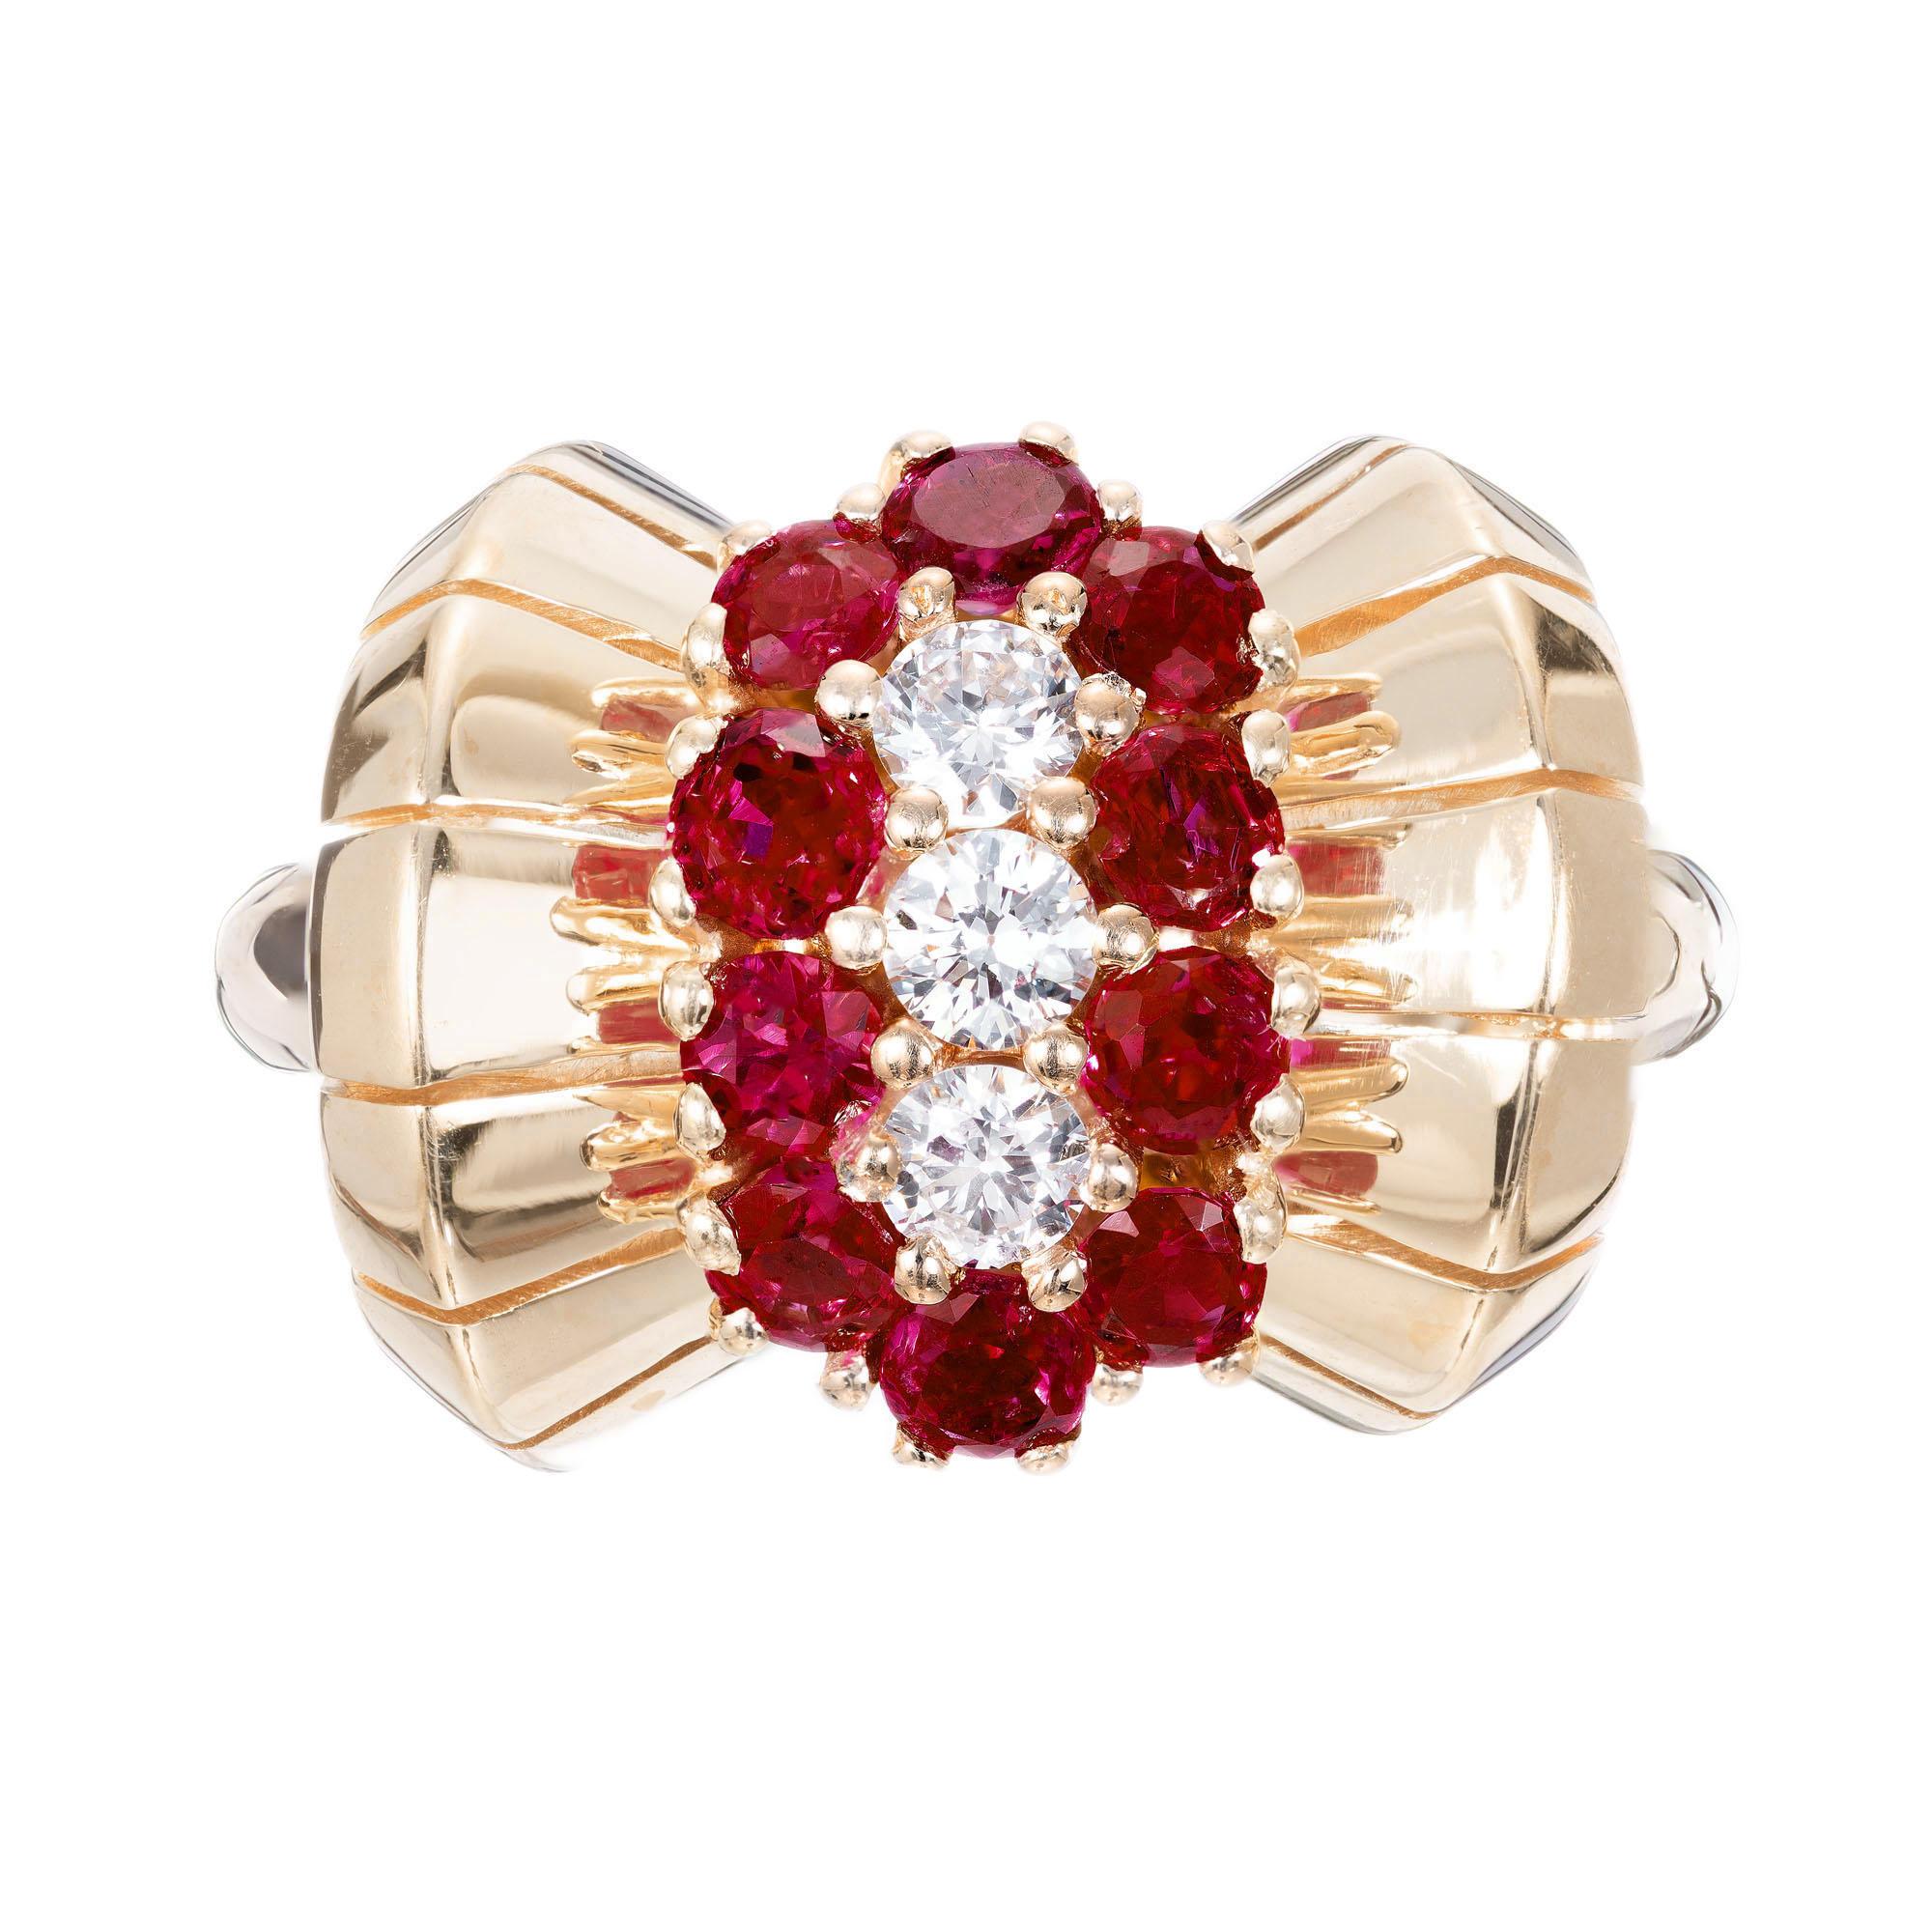 Circa 1930's round ruby and diamond 14k yellow gold bow style cocktail ring. 

3 full cut diamonds, approx. total weight .24cts, F, VS
10 2.5mm genuine Rubies, approx. total weight 2.50ct, gem bright red
Size 5+ and sizable
14k Yellow Gold
7.0